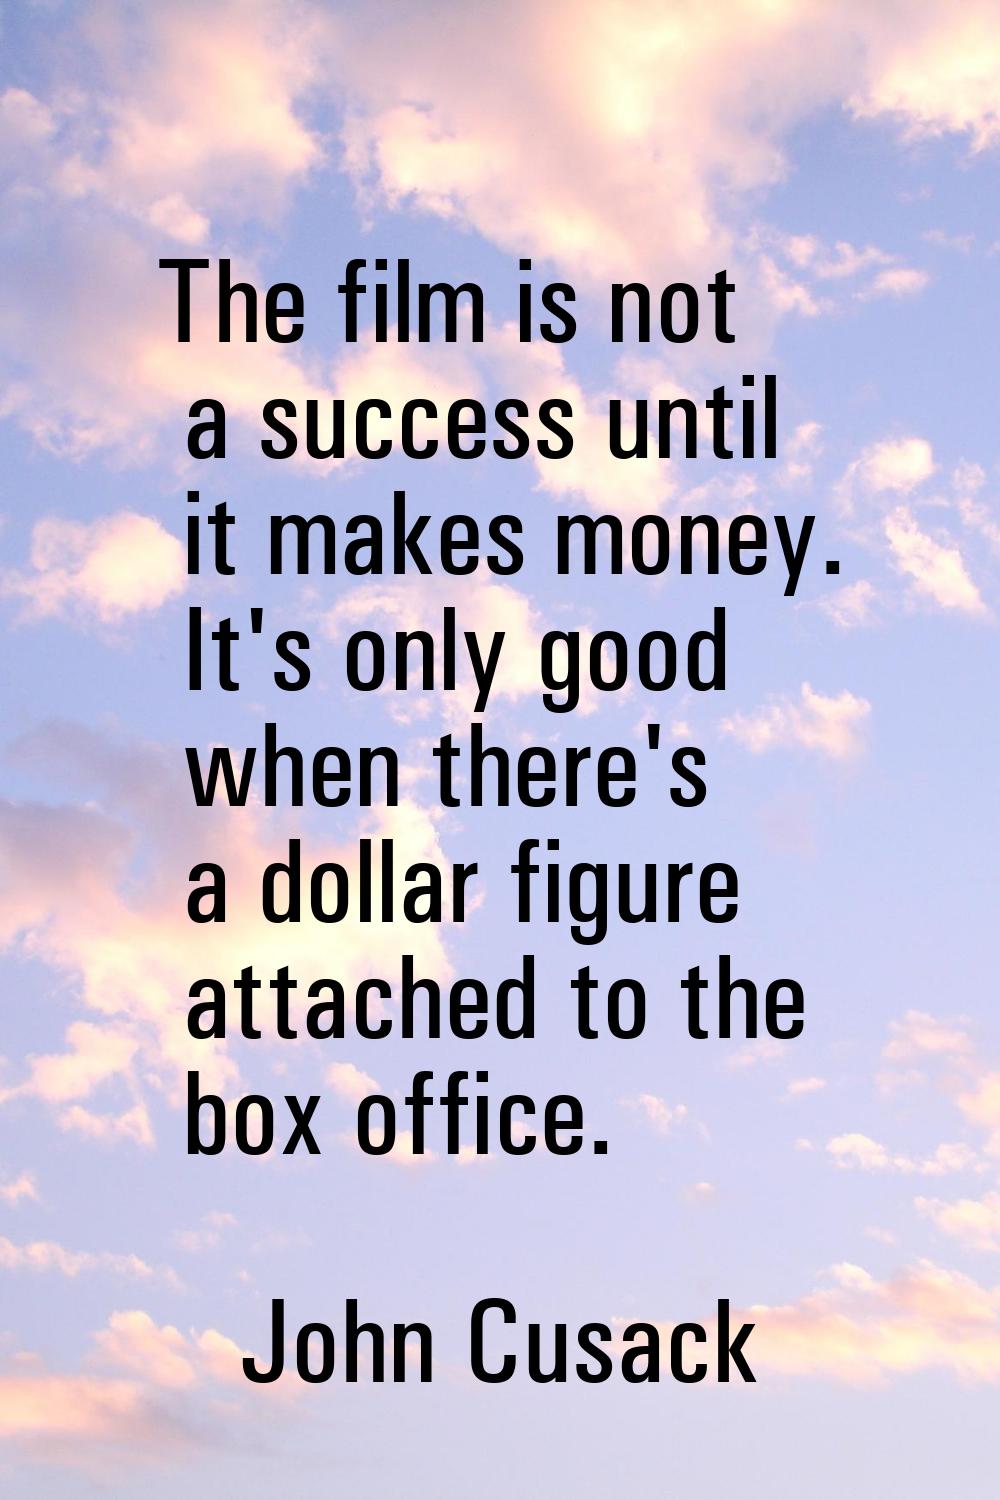 The film is not a success until it makes money. It's only good when there's a dollar figure attache